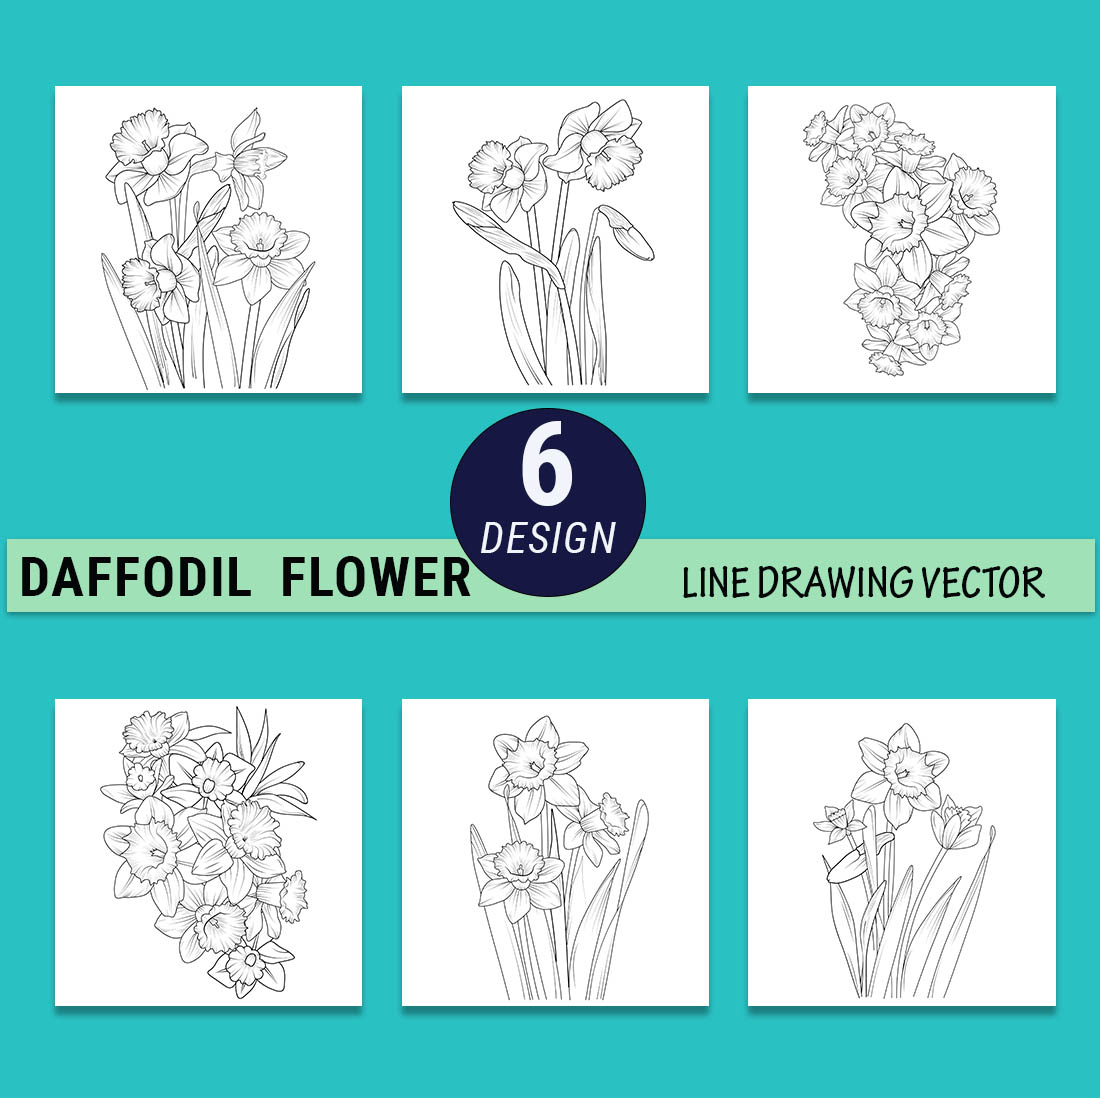 pencil narcussus flower drawing, daffodil vector art, daffodil pencil sketch, narcussus line art, daffodil tattoo drawing cover image.